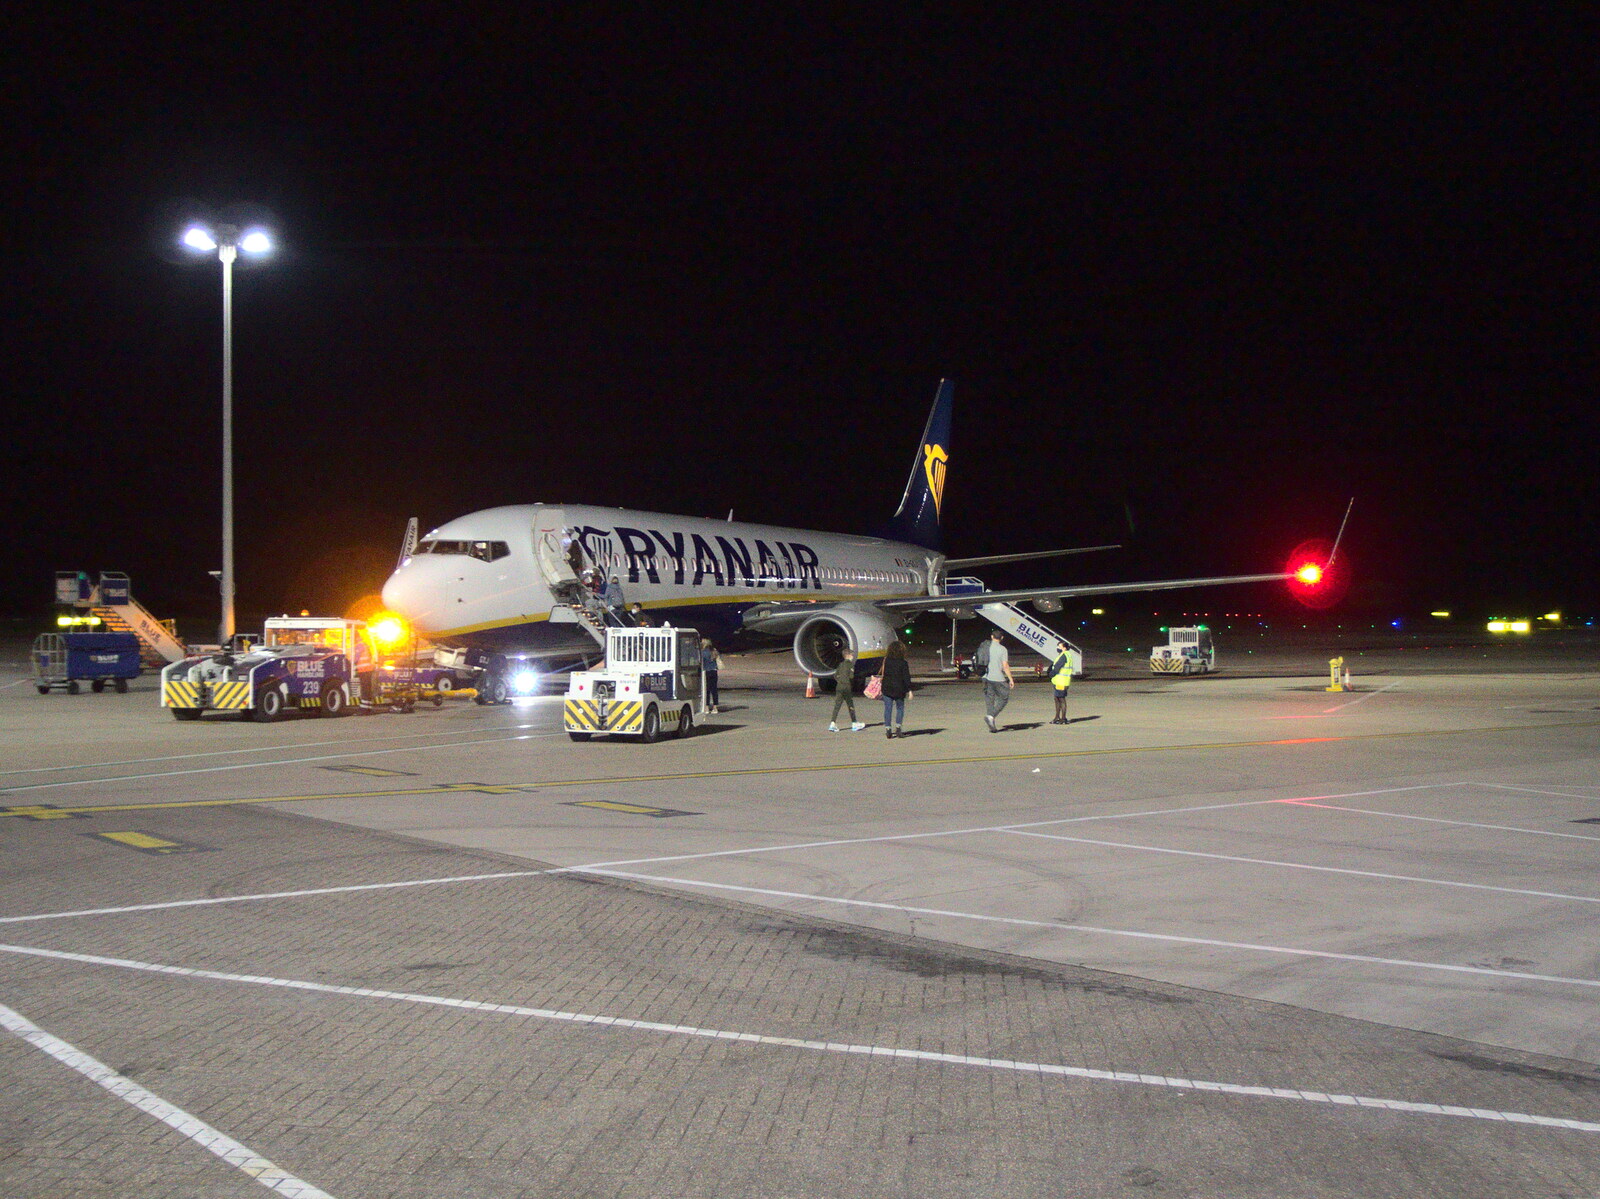 Our plane awaits on the apron from Five Days in Lanzarote, Canary Islands, Spain - 24th October 2021